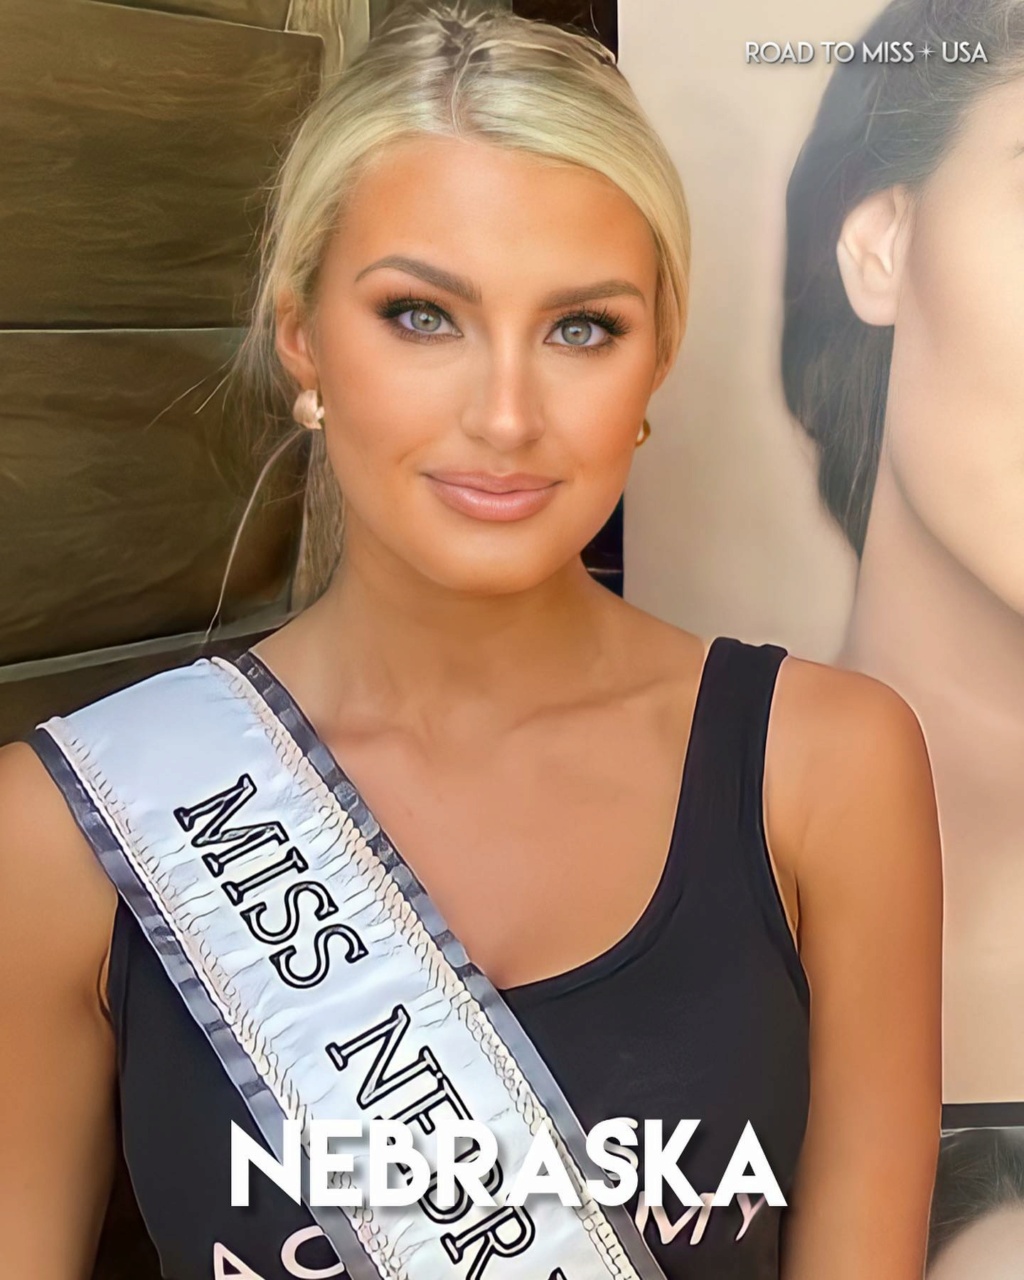 ROAD TO MISS USA 2021 is KENTUCKY! - Page 4 24239713